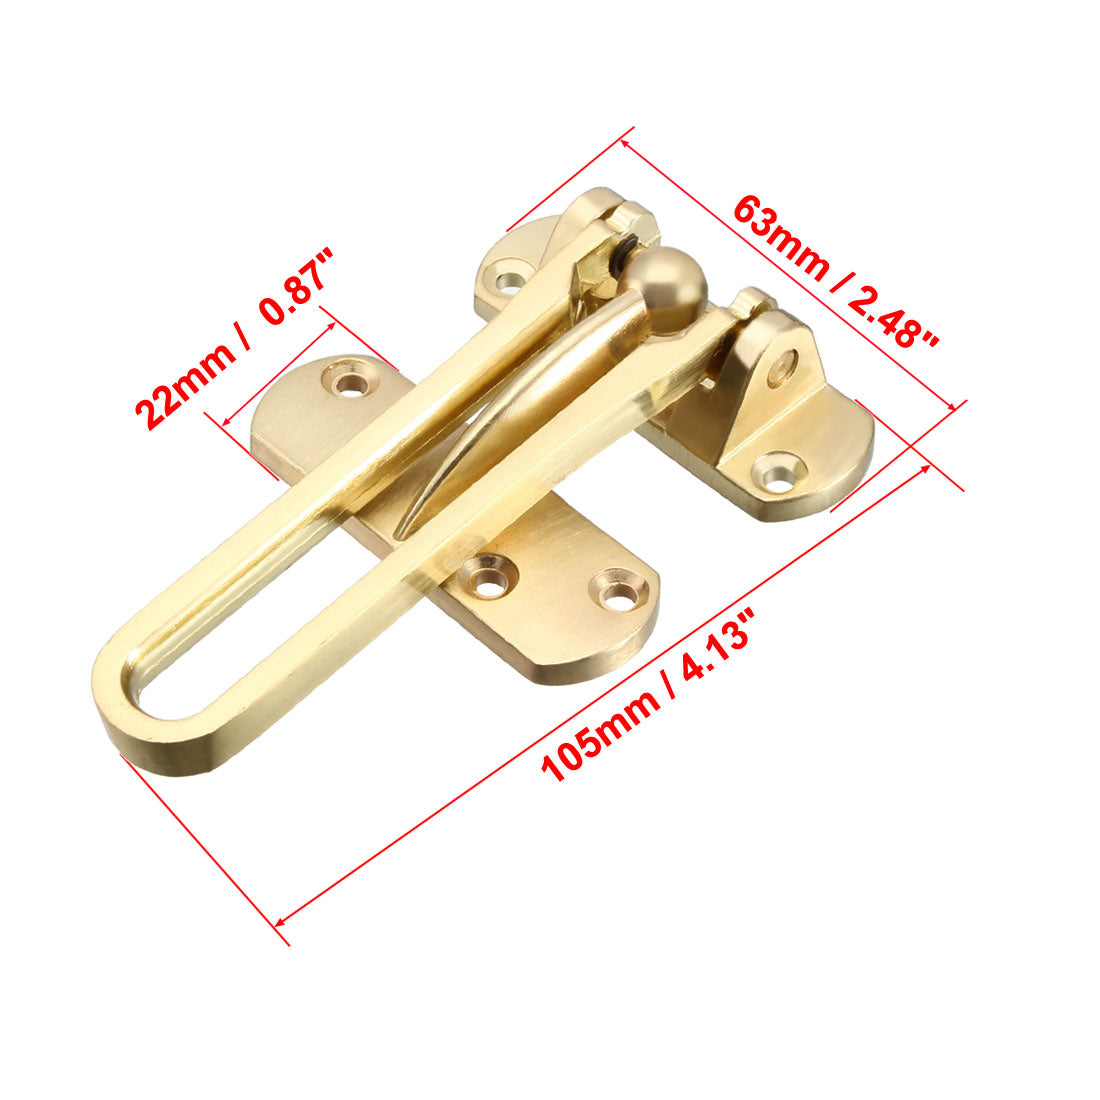 uxcell Uxcell Swing Bar Lock for Hinged Swing Secondary Security Lock for Door and Home Security, 4.13" Bar Length, Golden, Zinc Alloy, 2pcs